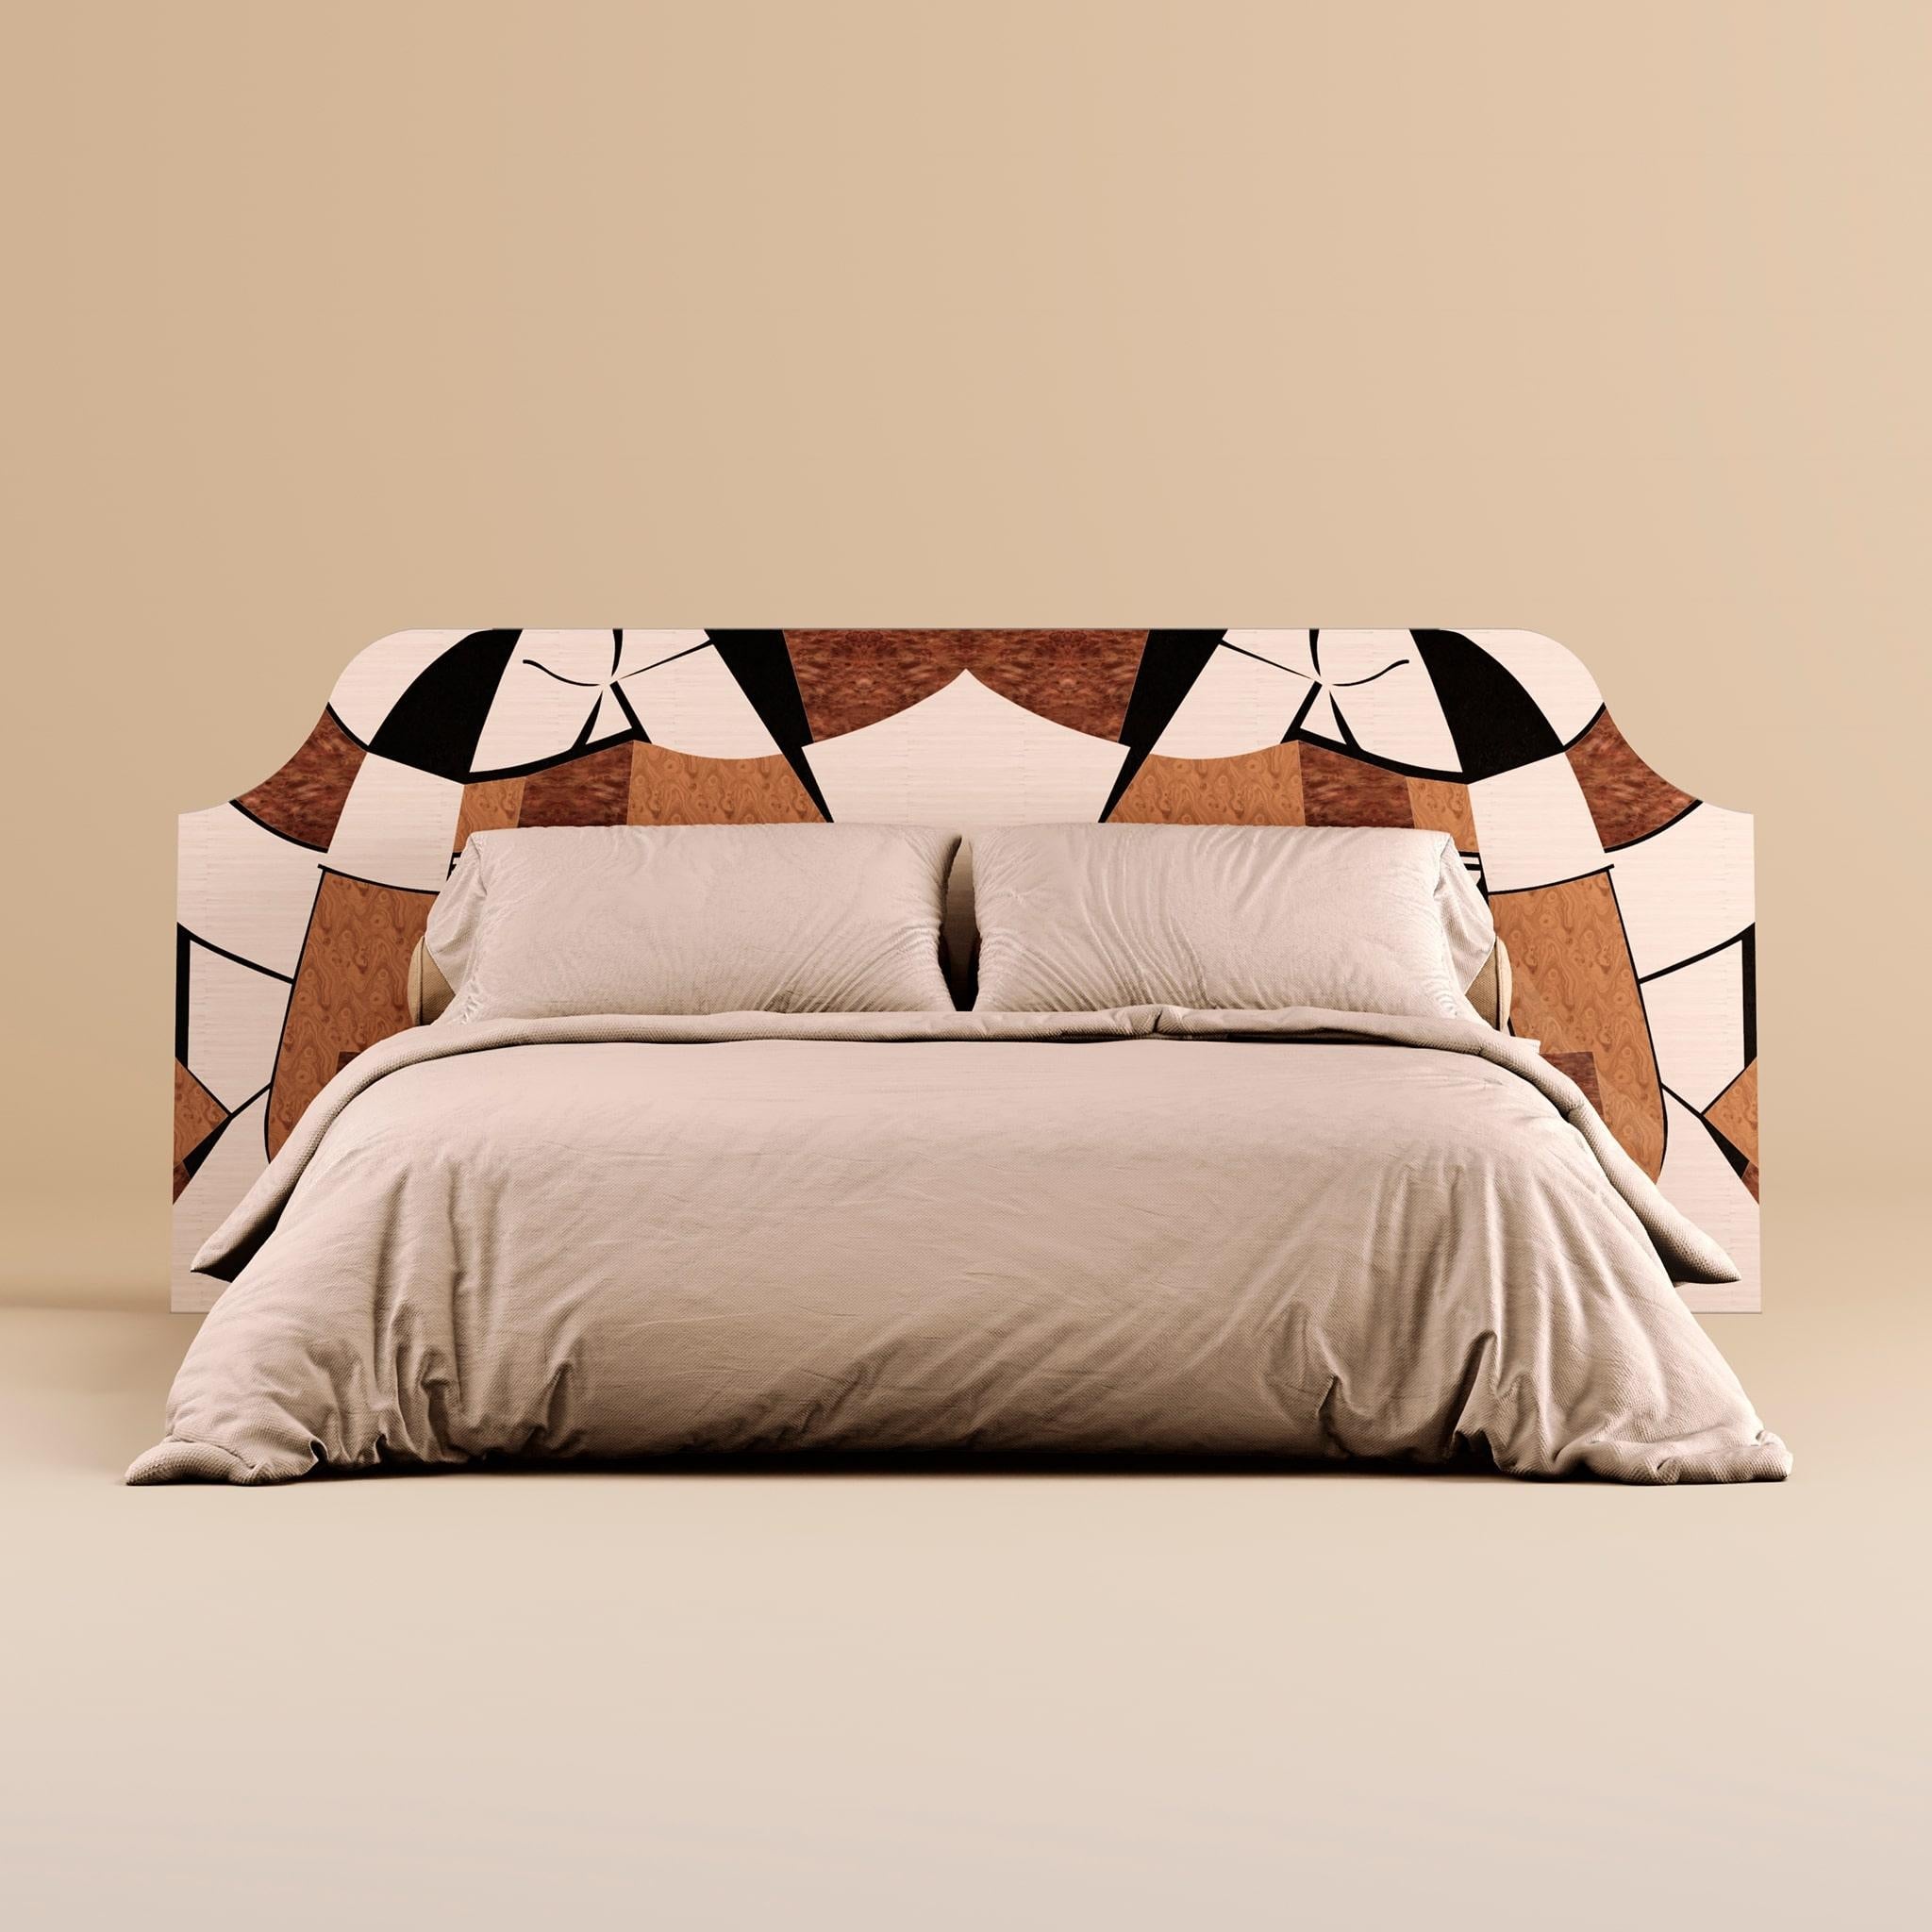 Portuguese 21st Century Contemporary Bed Modern Wood Headboard Marquetry Abstract Pattern  For Sale